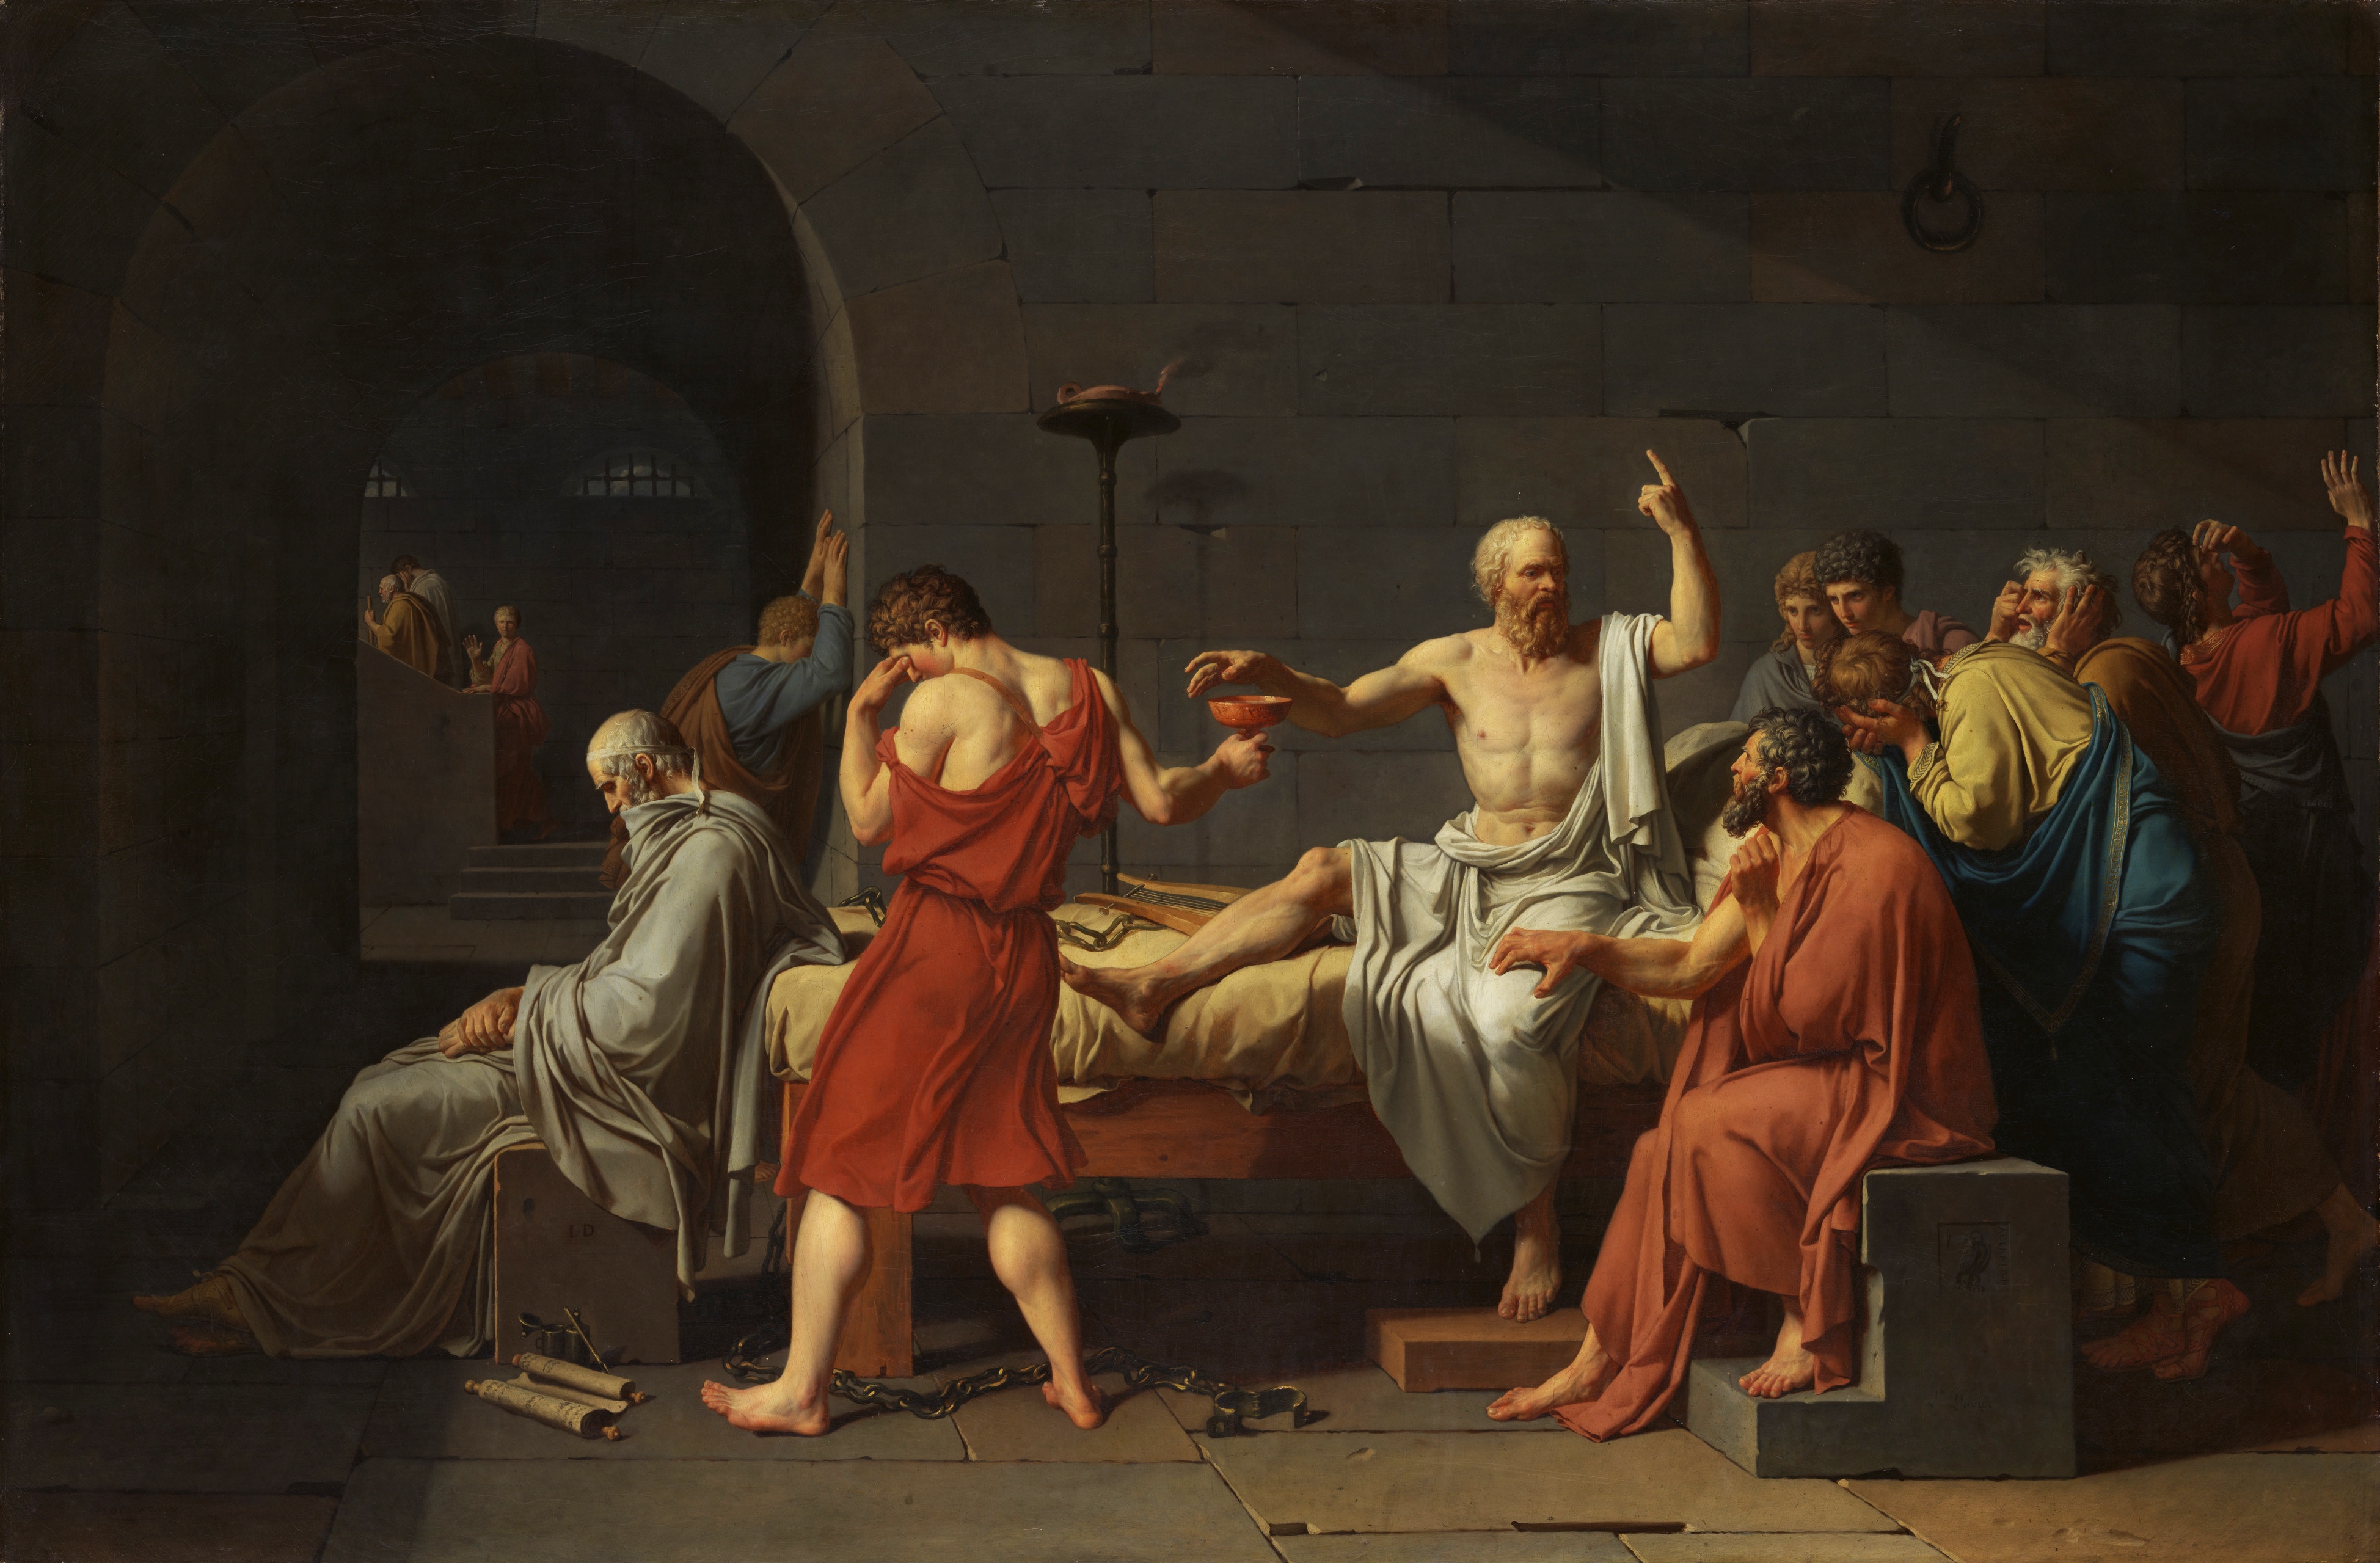 "The Death of Socrates" by Jacques-Louis David circa 1787.